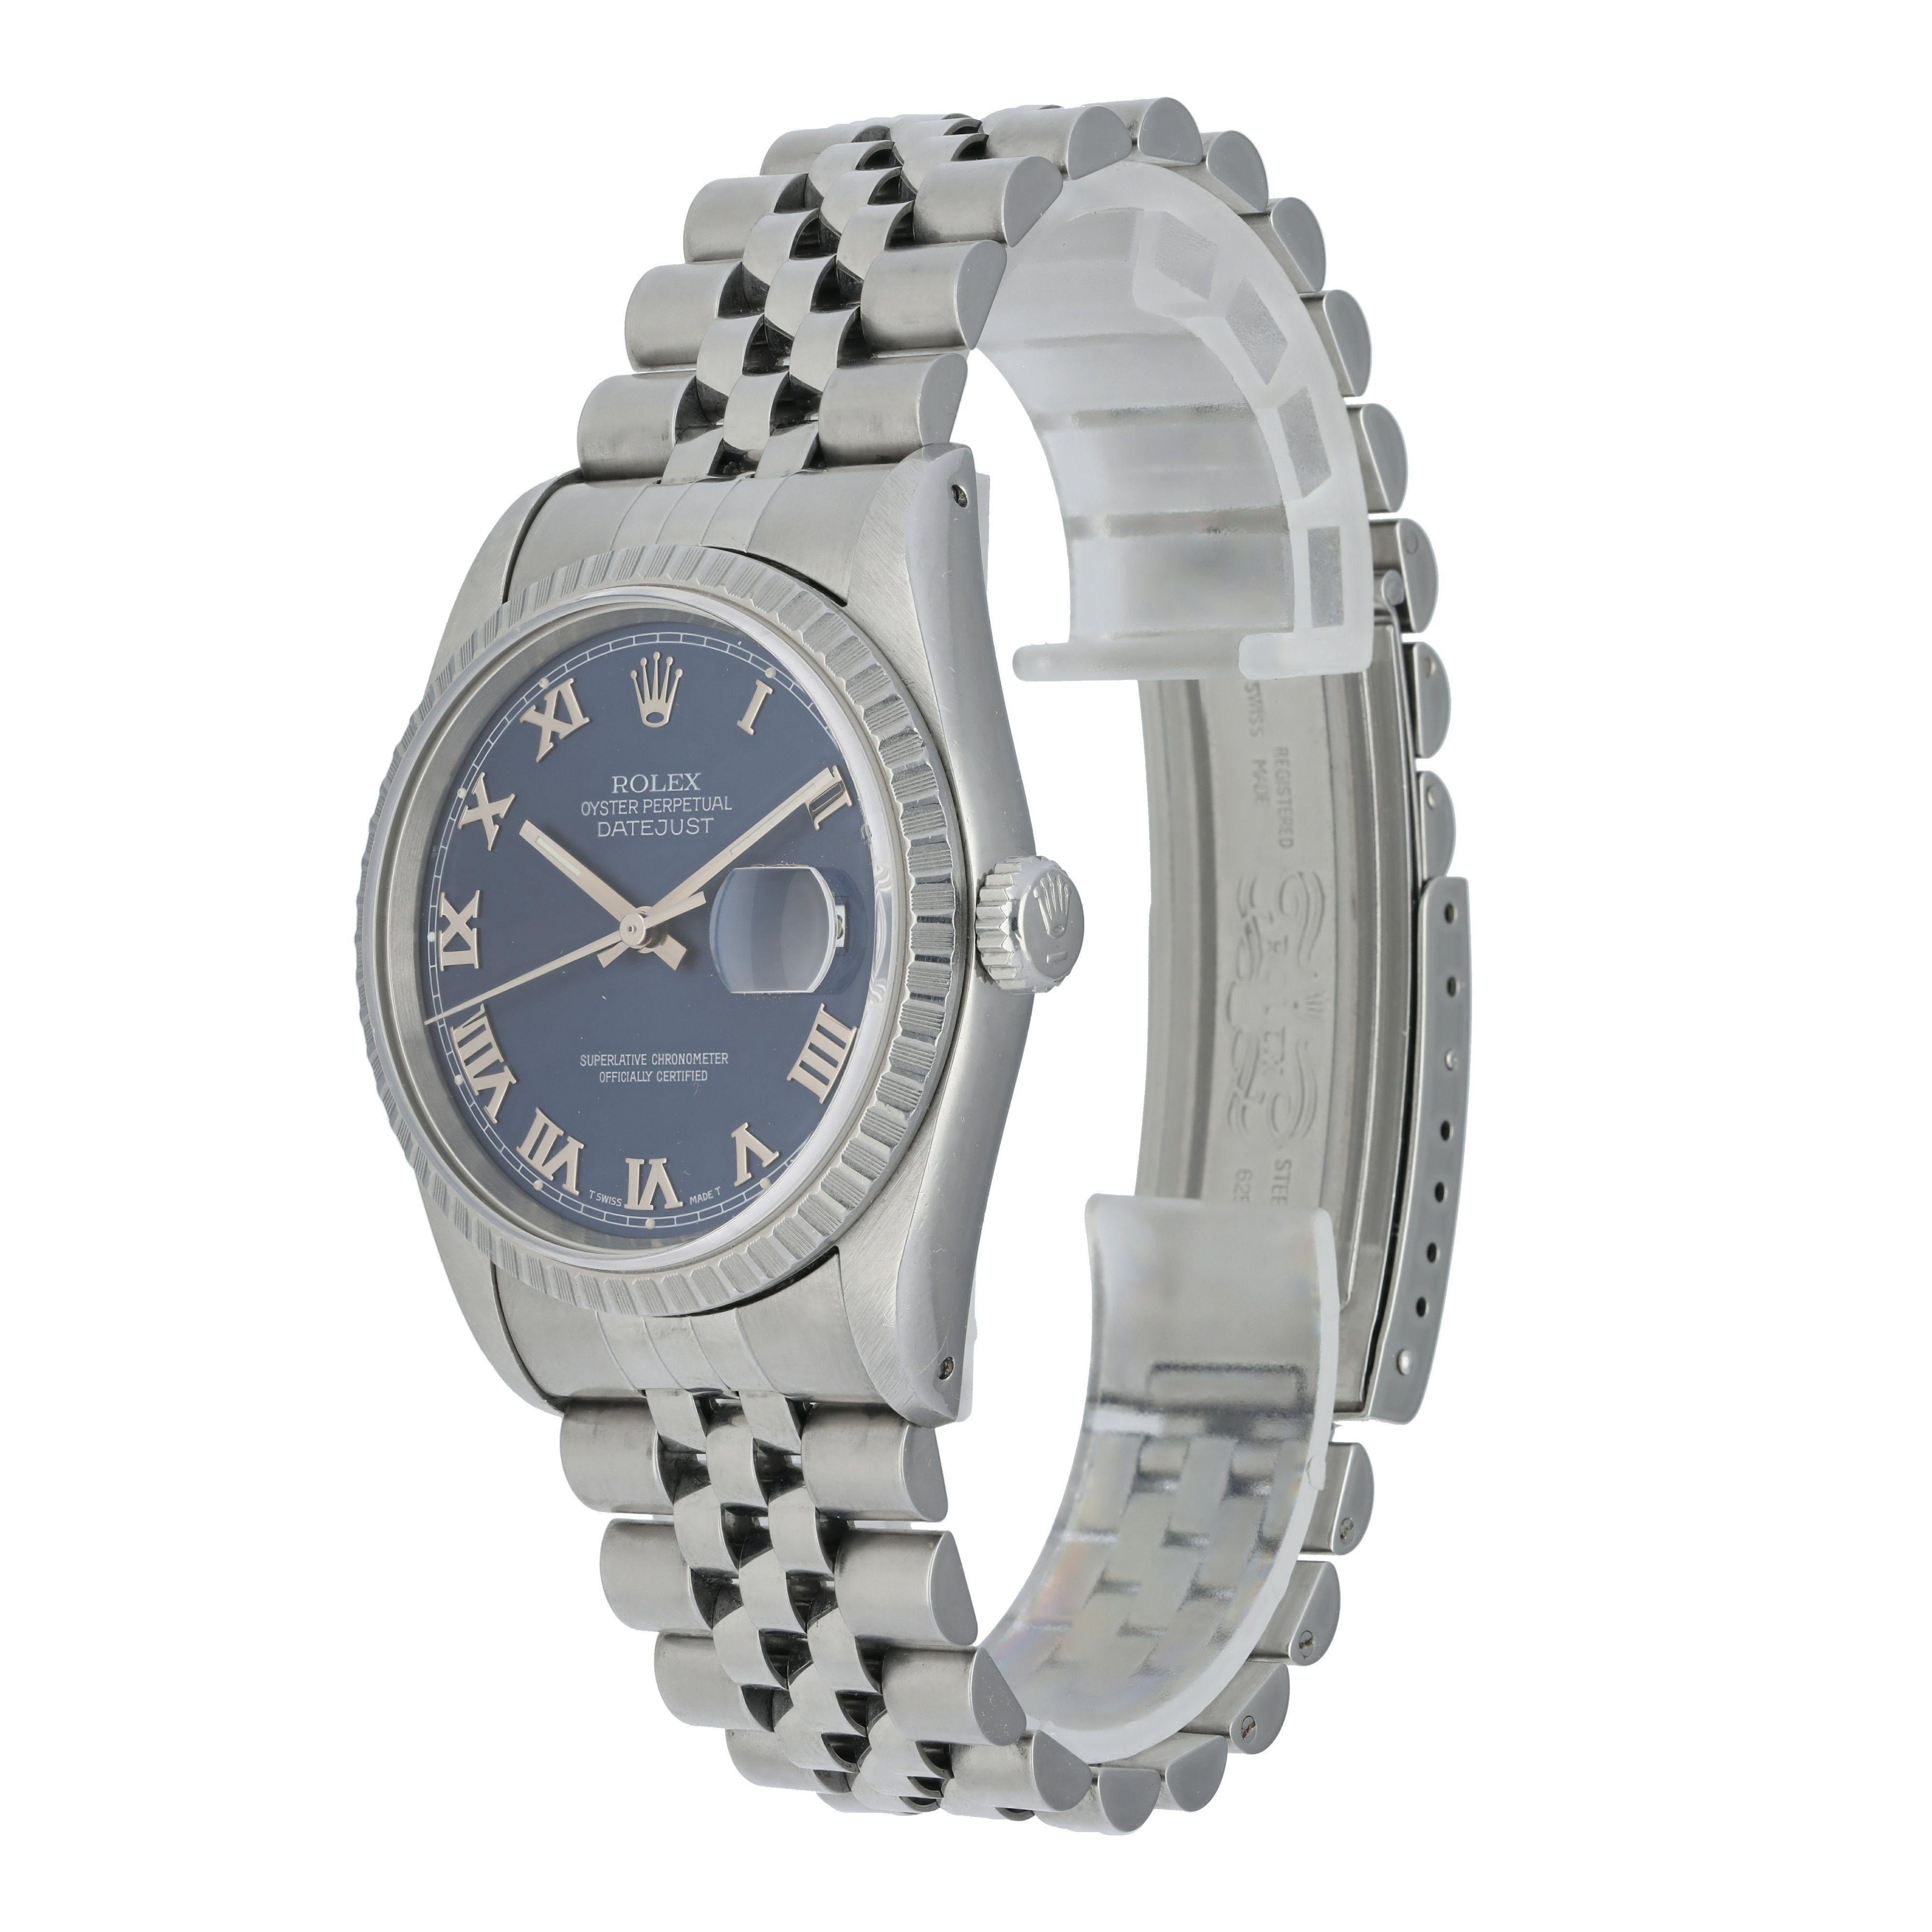 Rolex Datejust 16220 Mens Watch.
36mm stainless steel case with stainless steel engine turn bezel.
Blue dial with steel hands and Roman numeral hour markers.
Date display at 3 o'clock position.
Minute markers around the outer dial.
Stainless steel